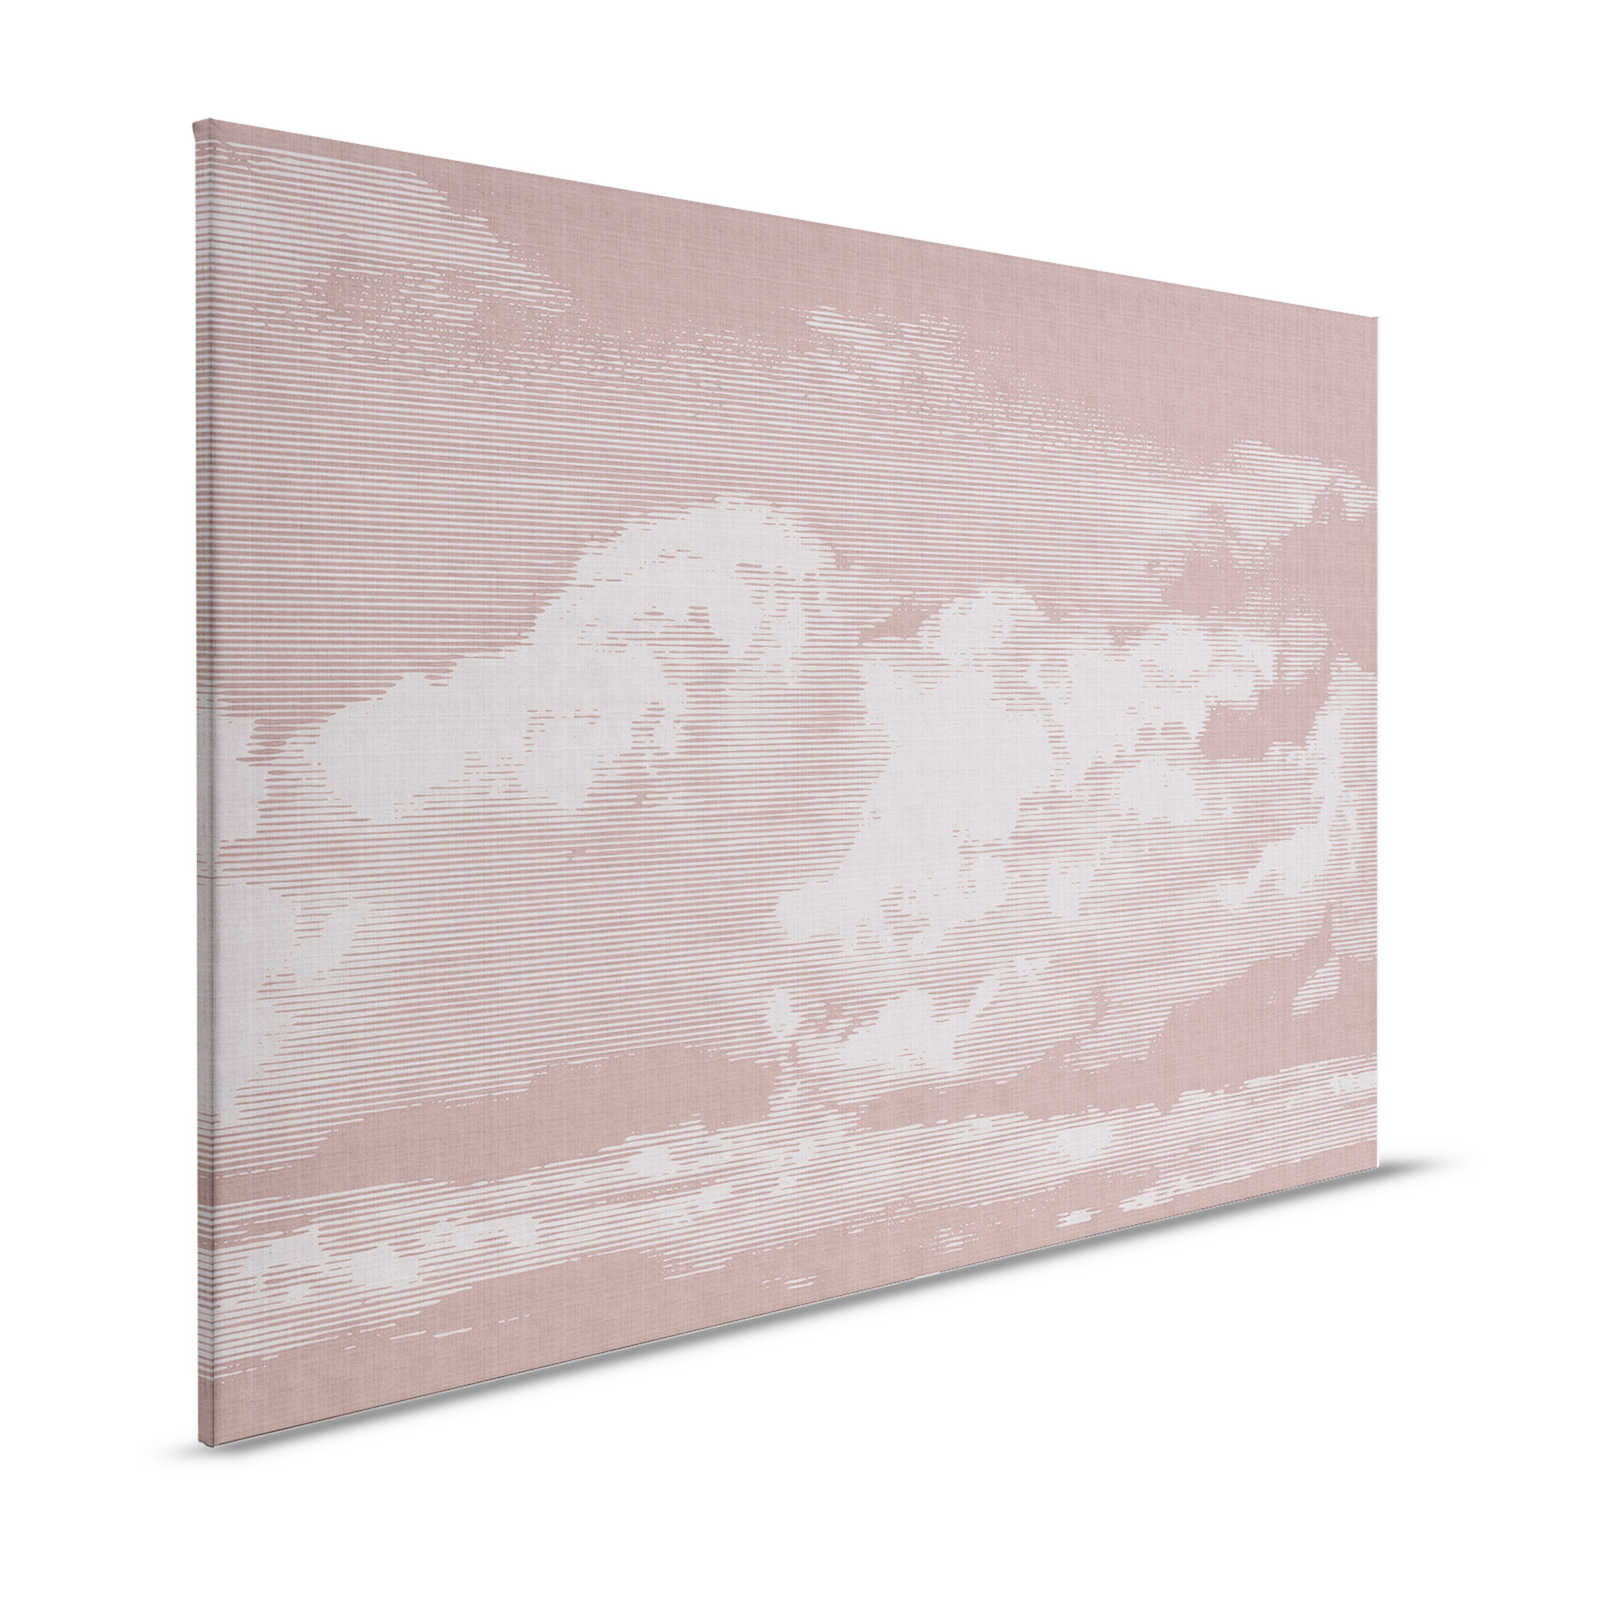 Clouds 3 - Heavenly canvas picture with cloud motif - Nature linen look - 1.20 m x 0.80 m
